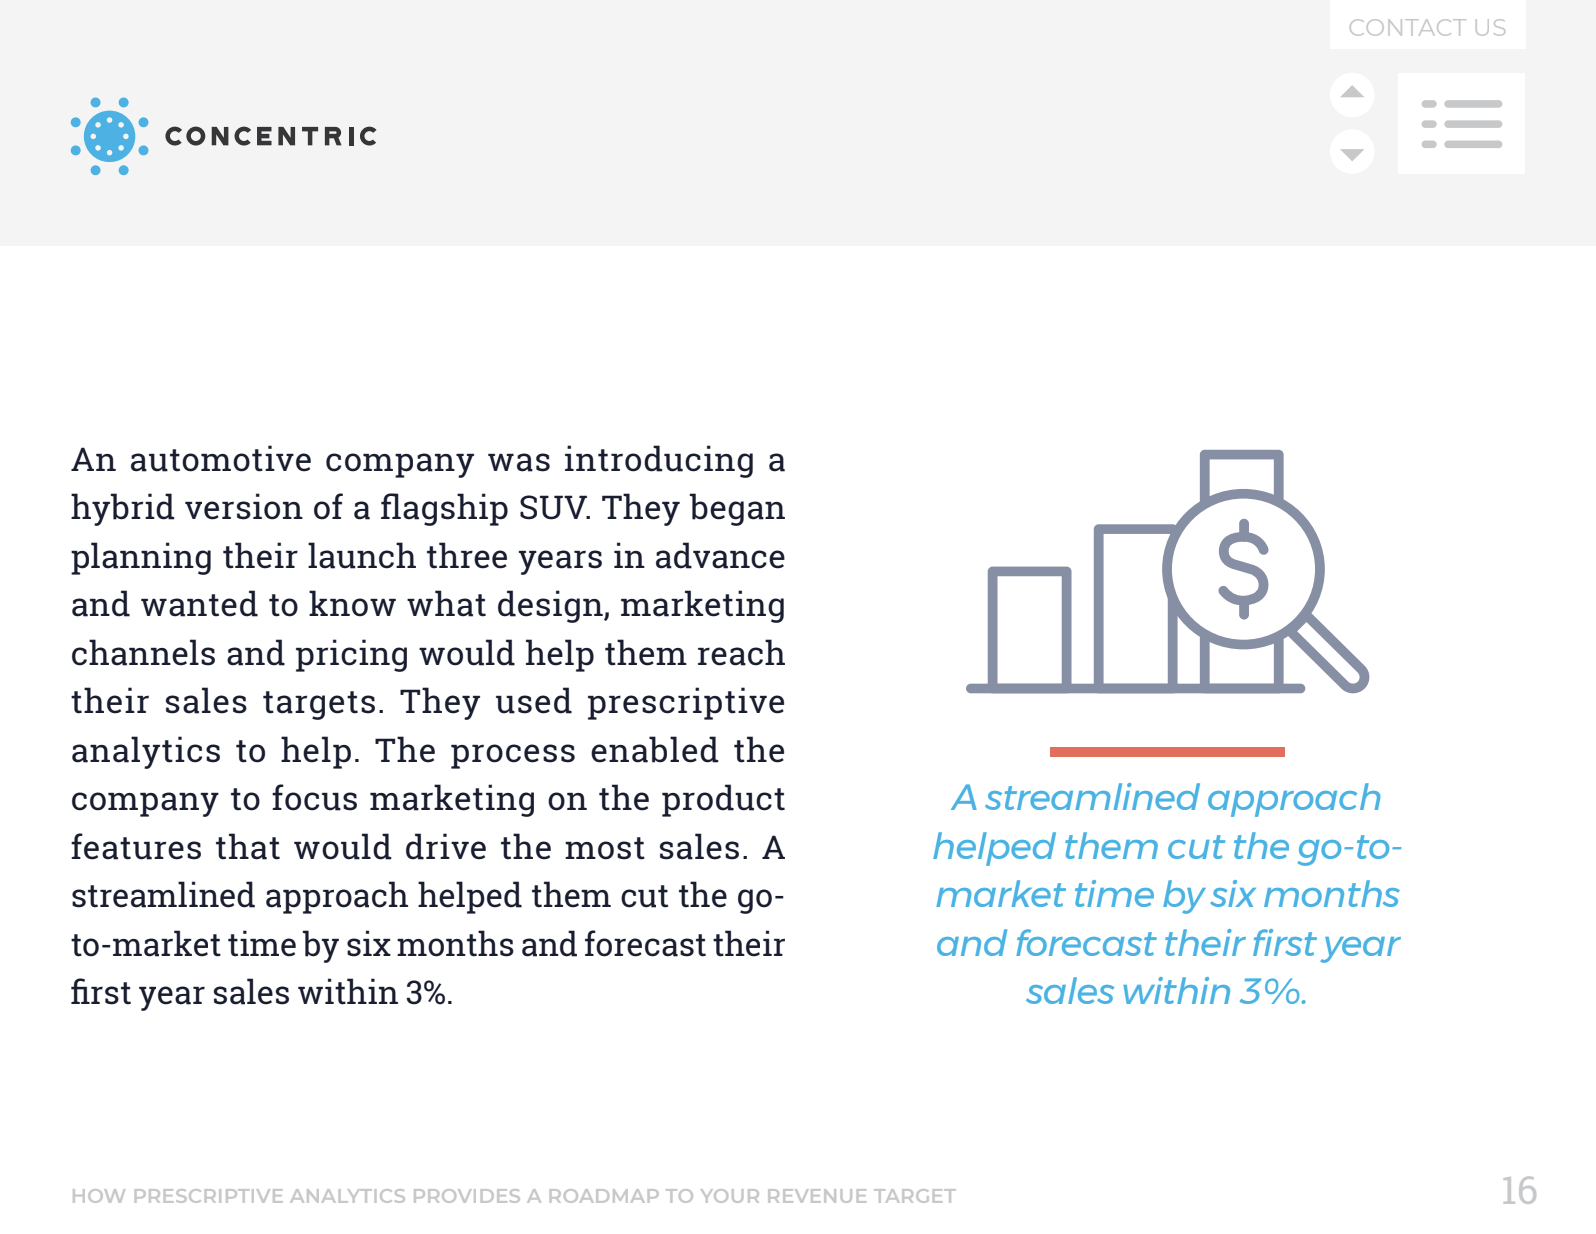 An excerpt from Concentric’s highly successful eBook about prescriptive analytics.